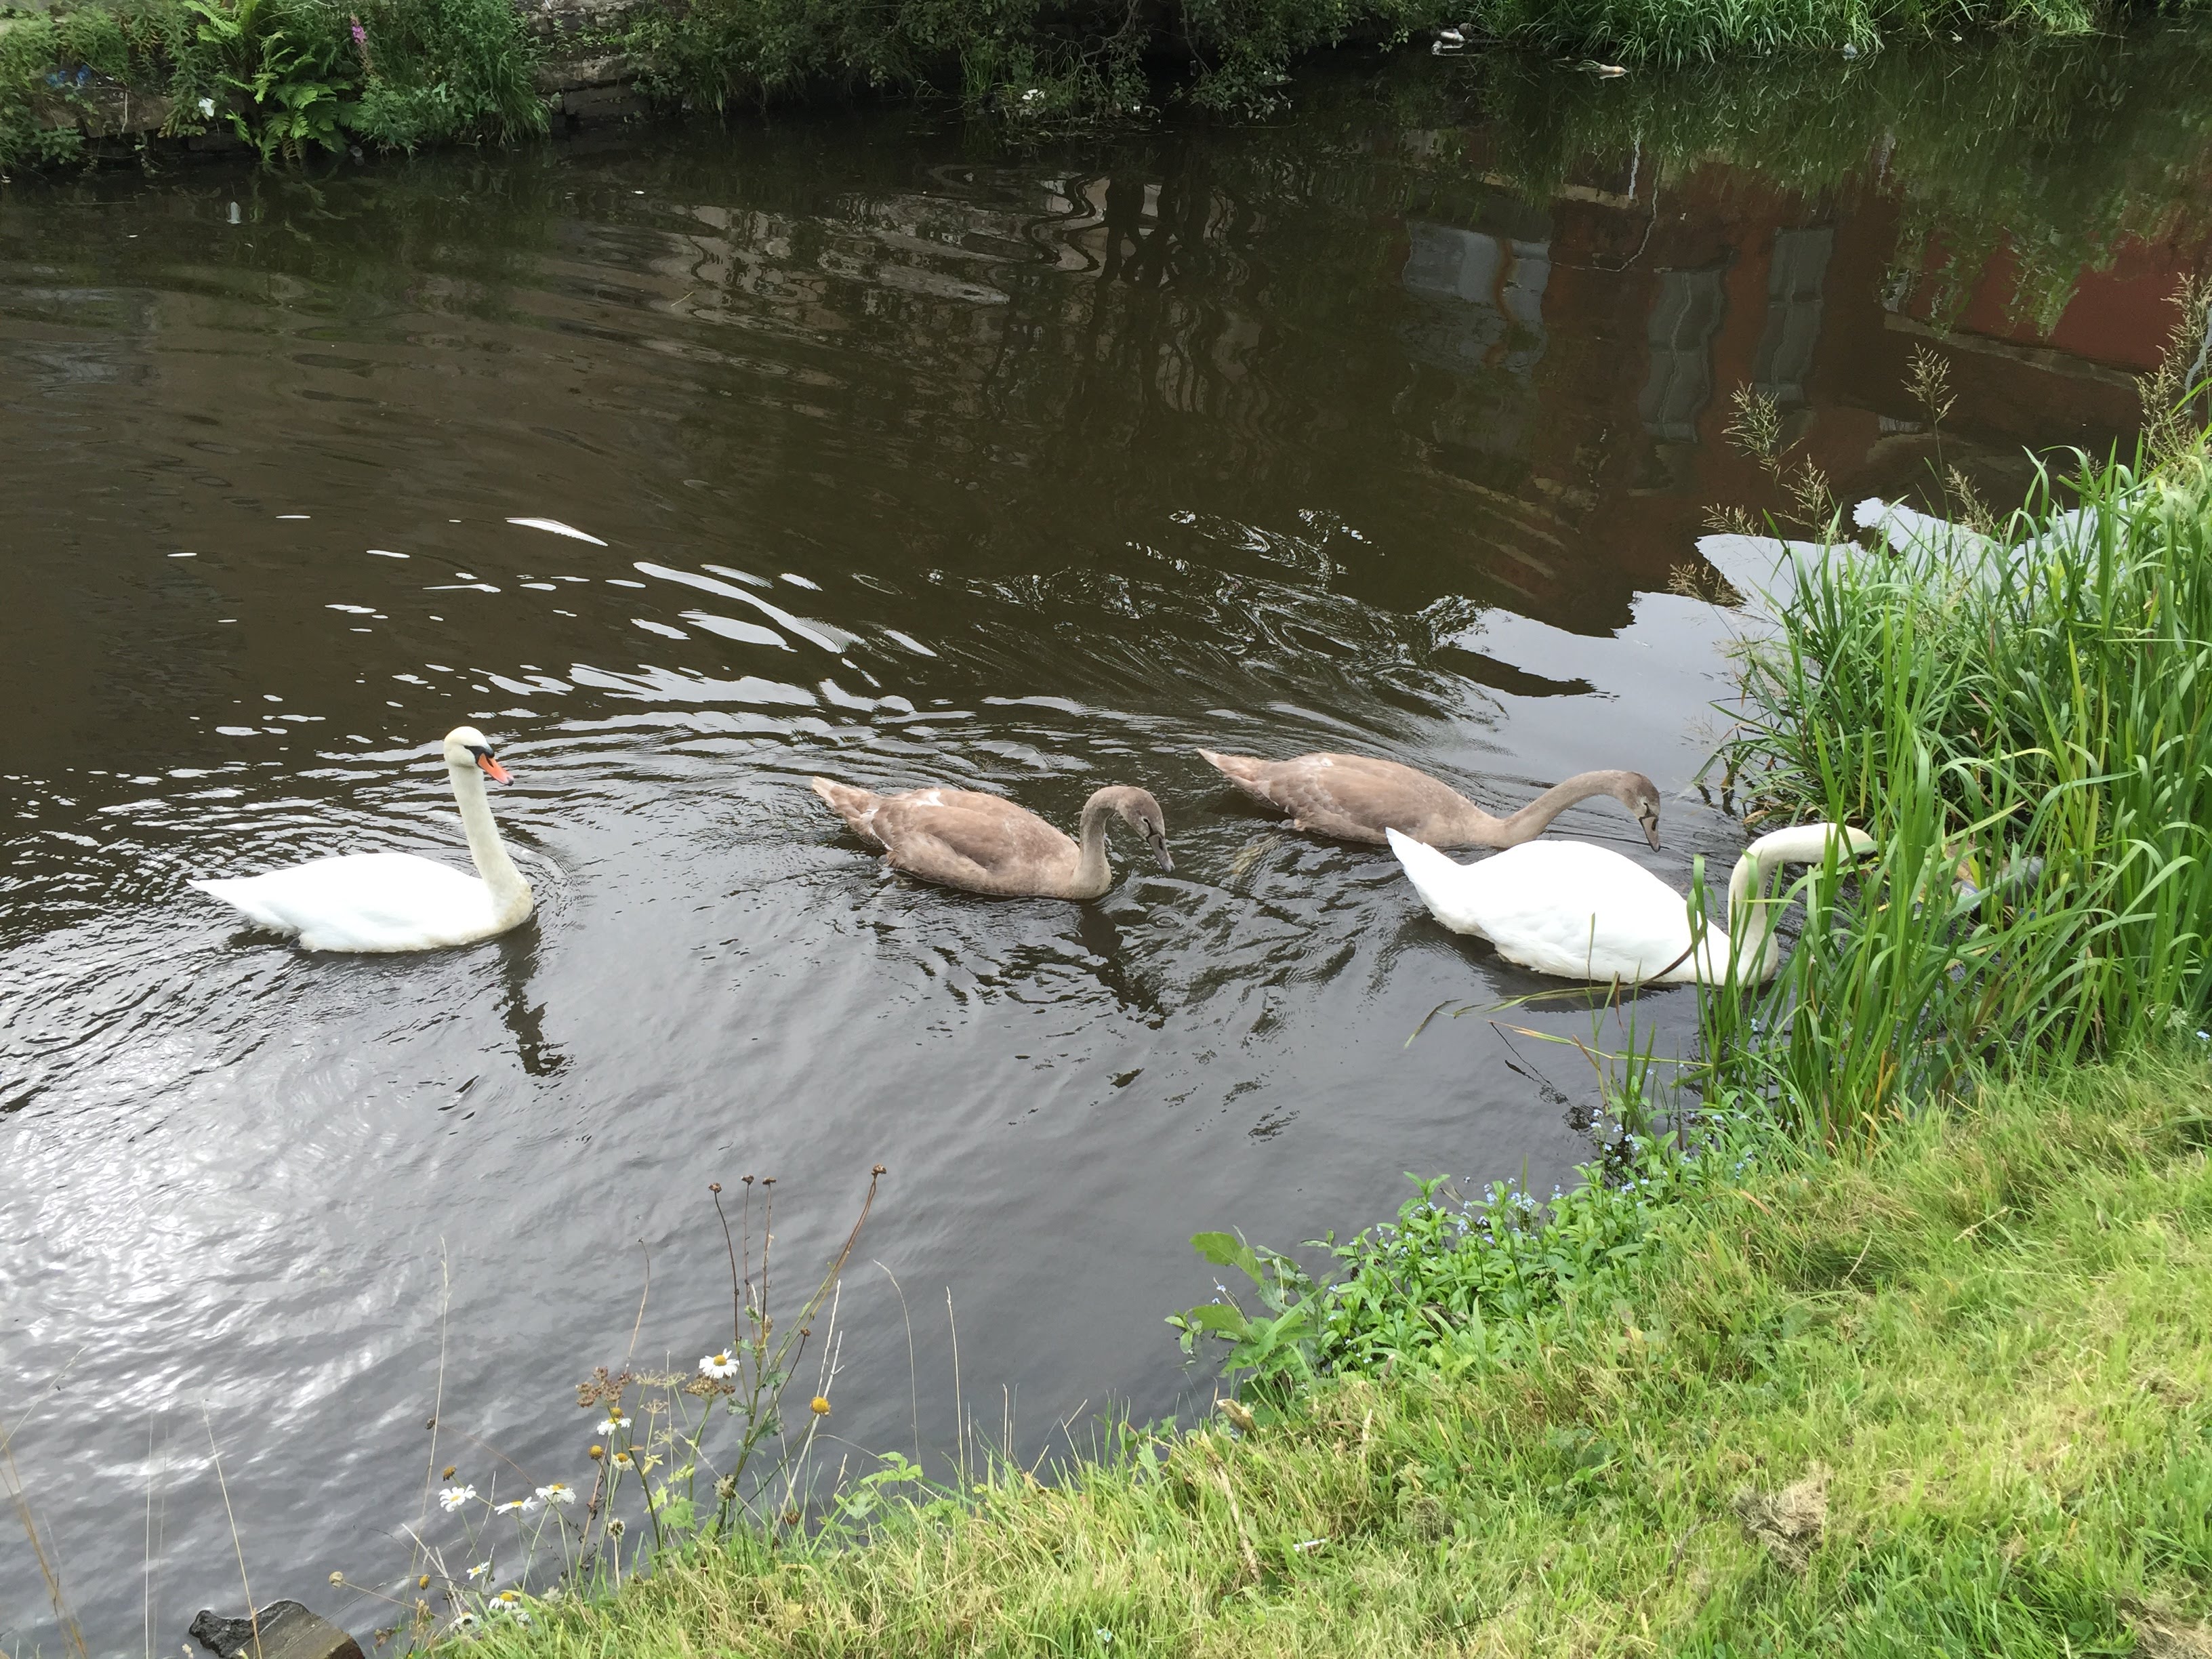 Swans - Leeds and Liverpool Canal in Burnley